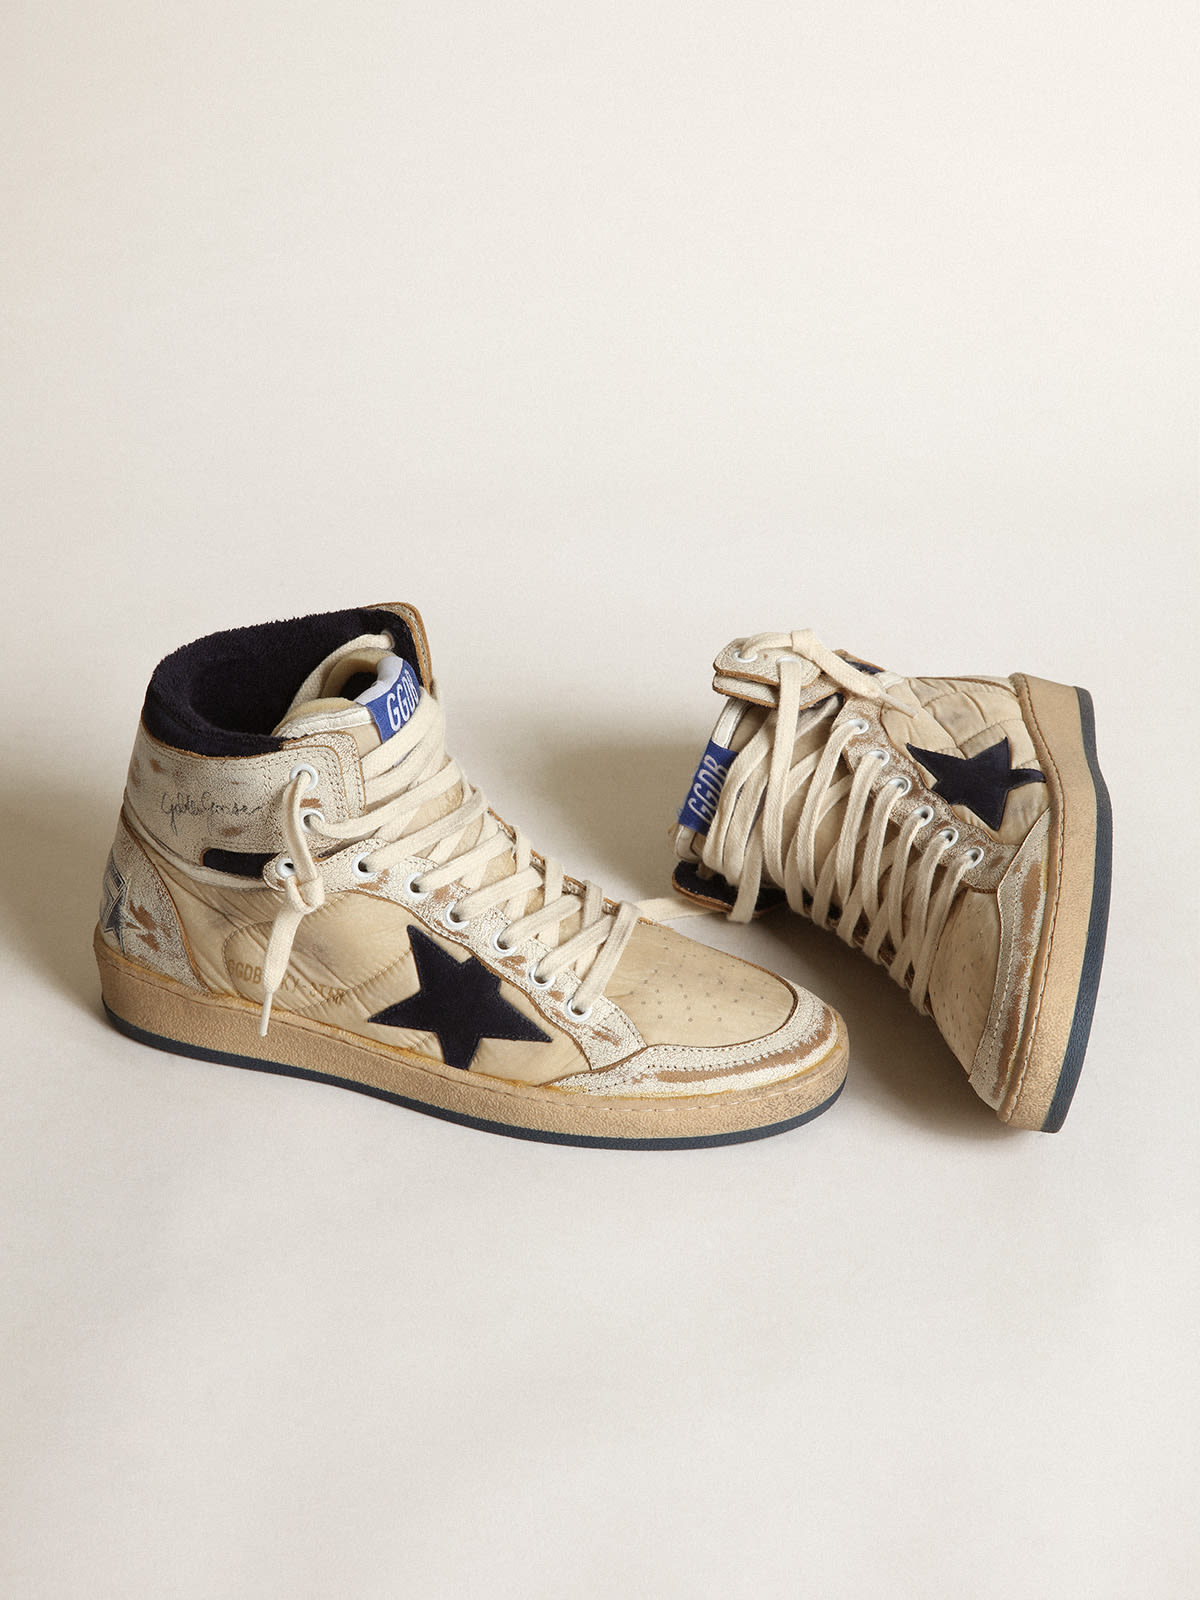 Golden Goose - Women’s Sky-Star in nylon and white leather with blue suede star in 